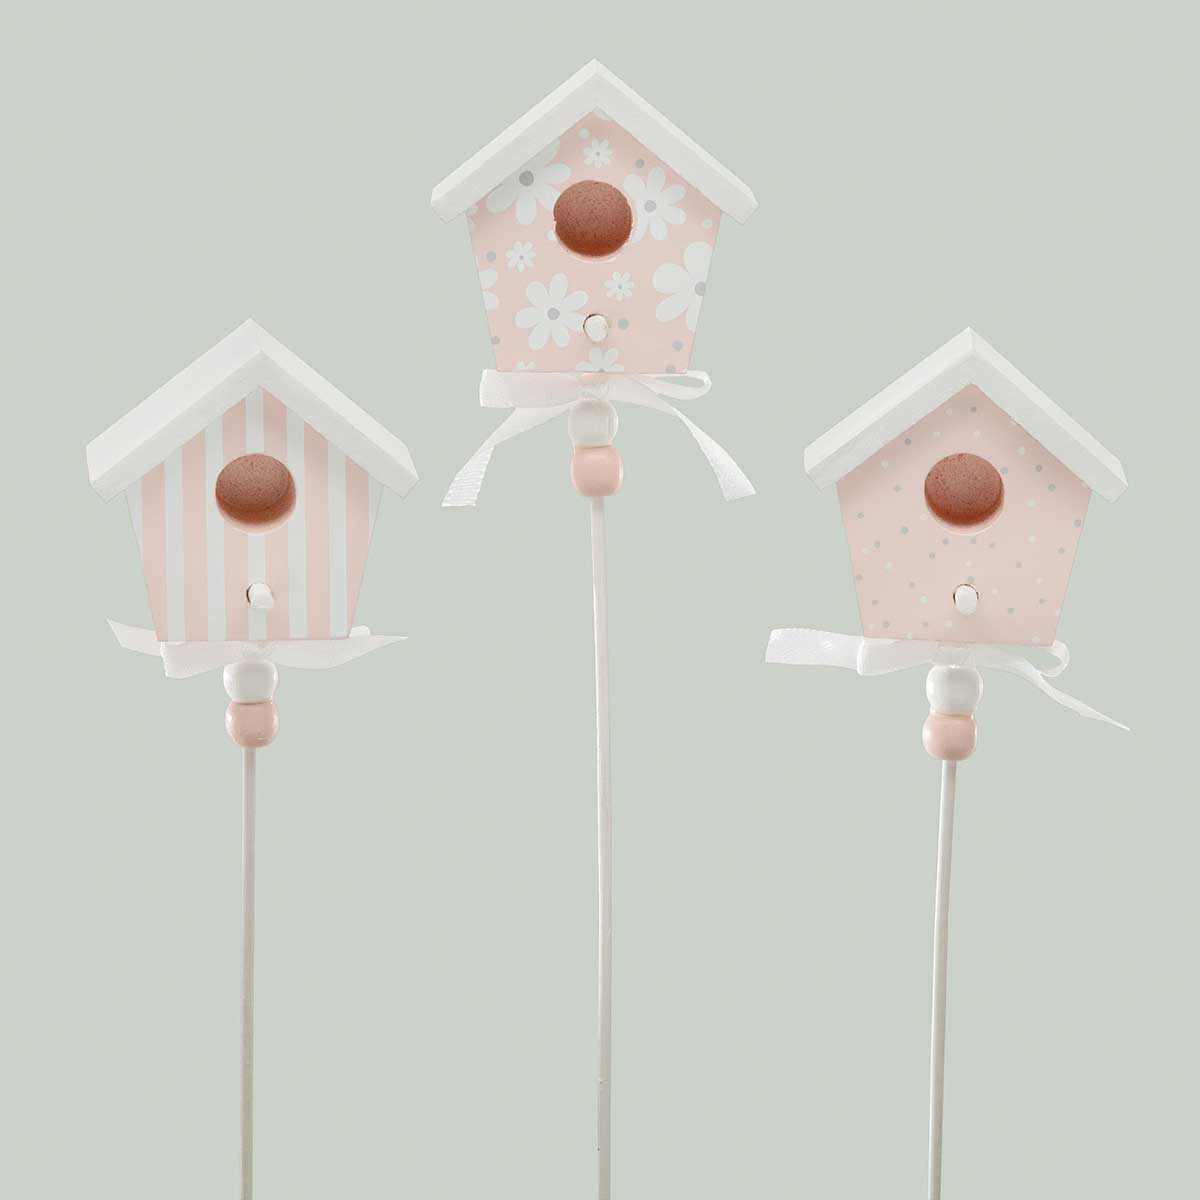 BIRDHOUSE ON STICK 3 ASSORTED 2.25IN X 1.25IN X 2.25IN WOOD